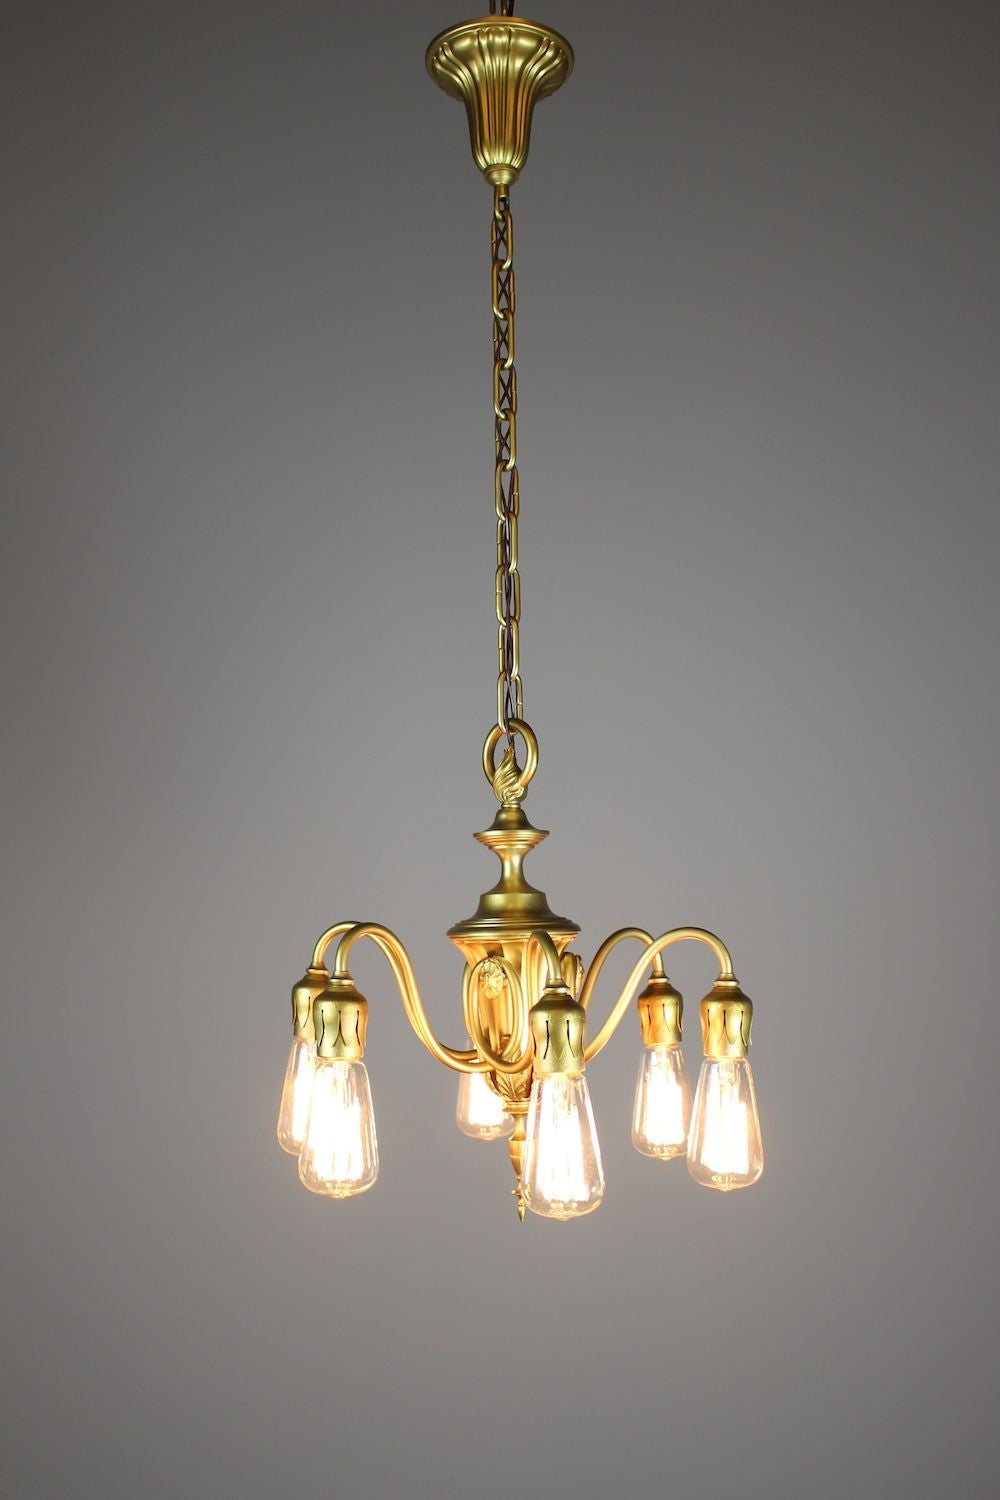 Circa 1925. Lovely Adam Style Bare Bulb Fixture by R. Williamson & Co of Chicago (6-Light) Retains original gilt finish. This light has been cleaned, rewired, and restored. Ready to hang. 
DF1231 Measurements 40"H x 16"W